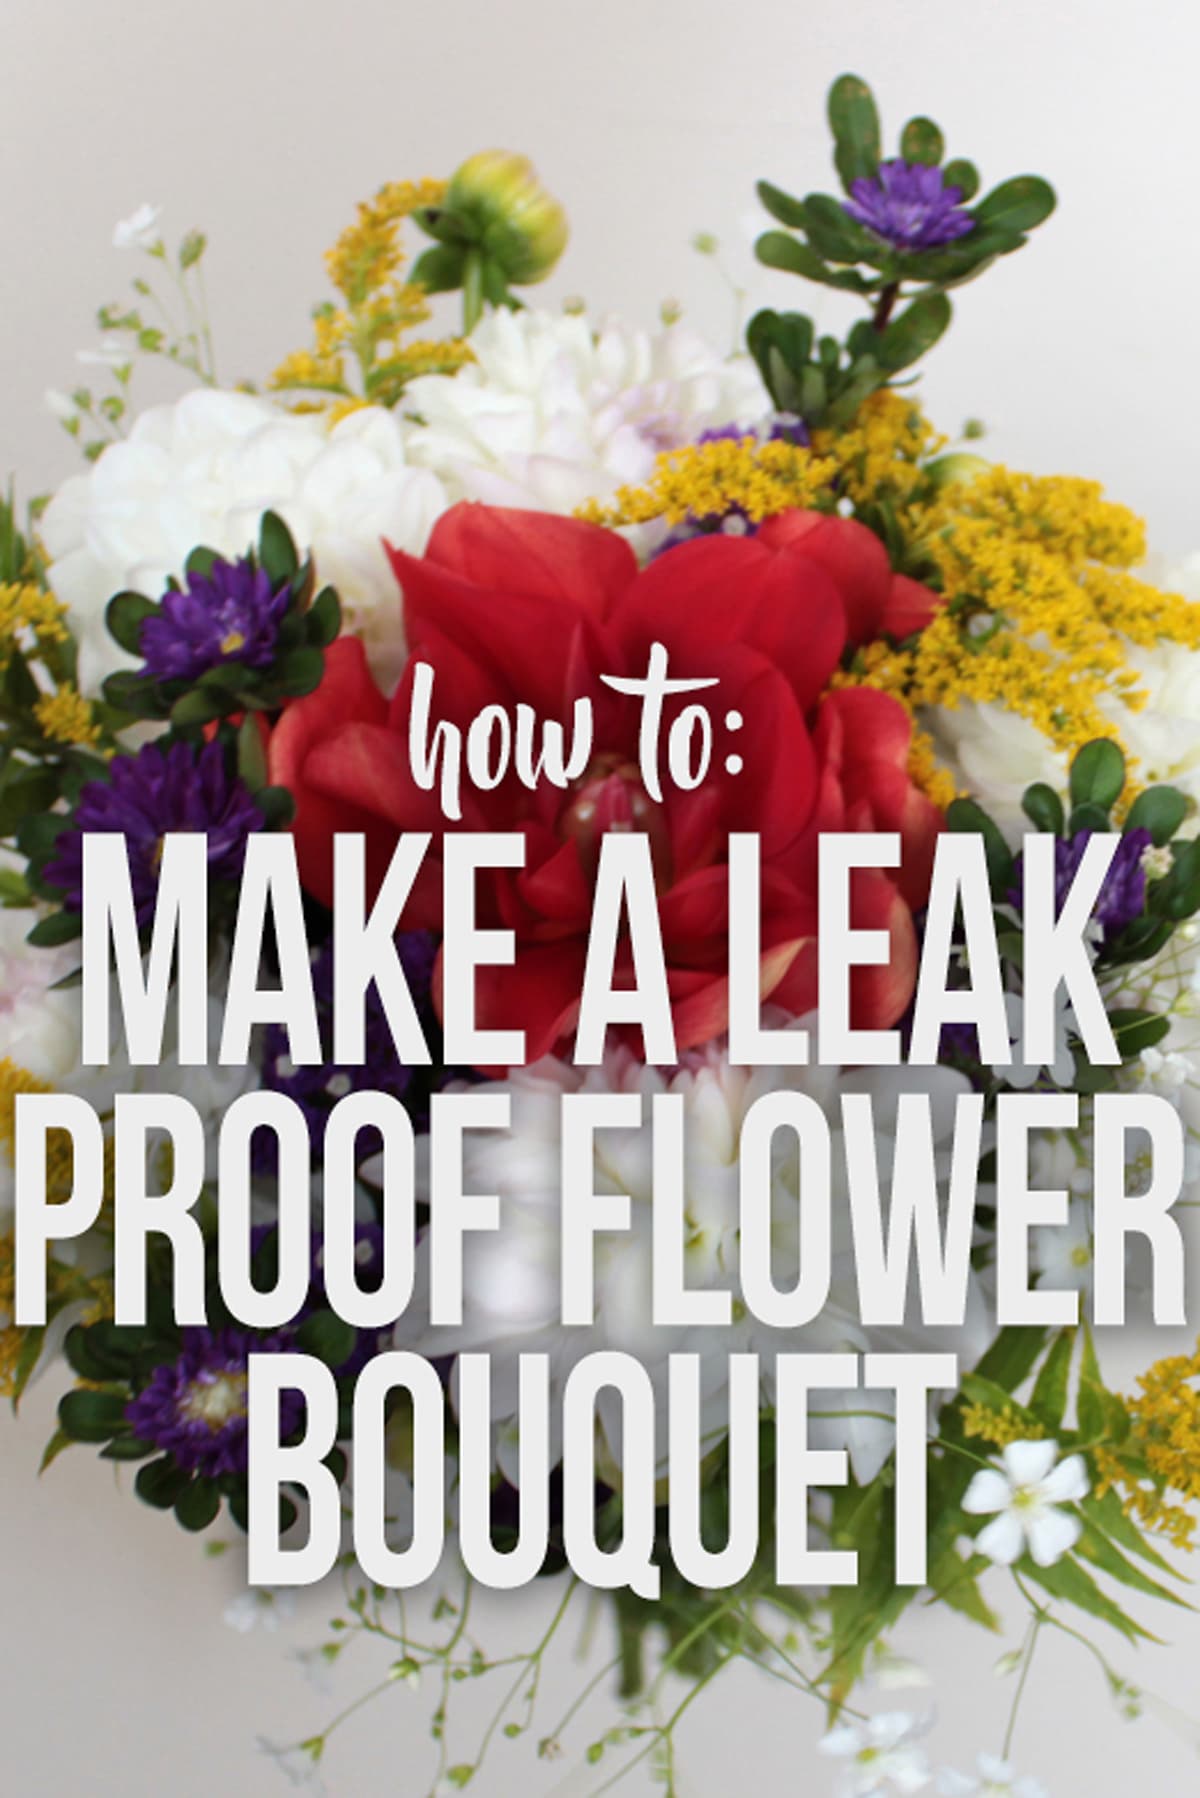 In this tutorial I show how to wrap a bouquet that will last for days without needing water